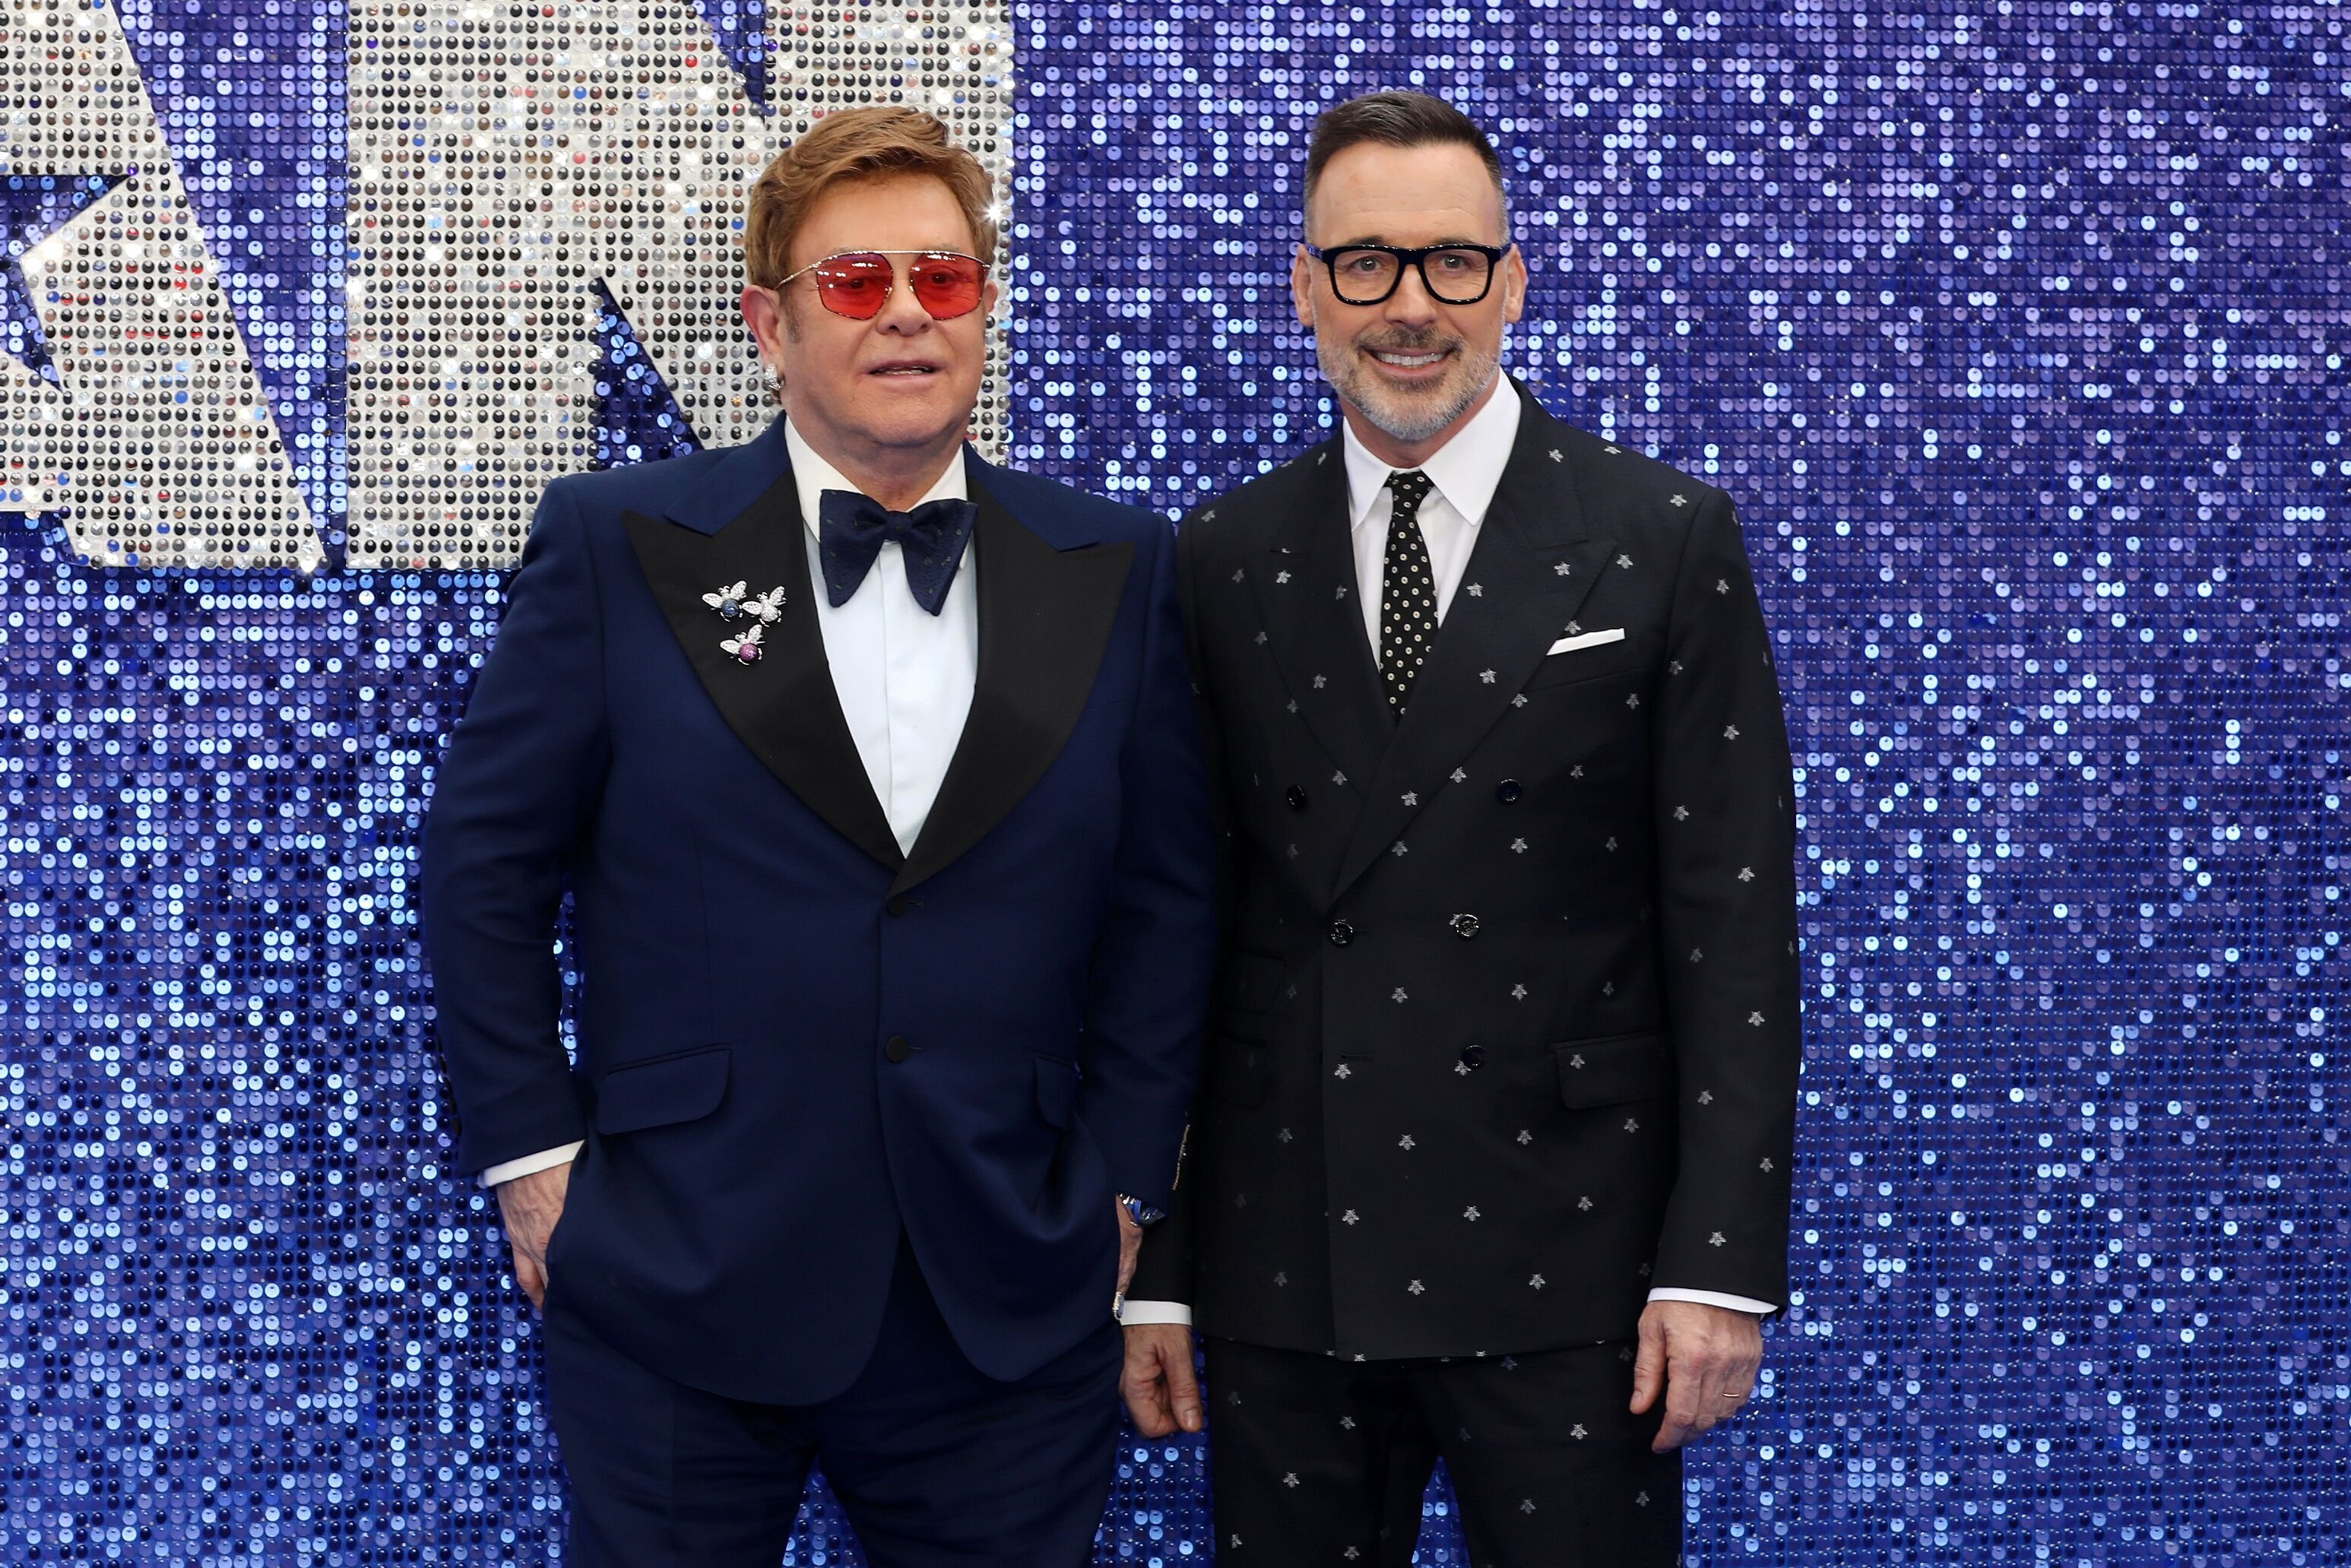 Sir Elton John and David Furnish attend the "Rocketman" UK premiere at Odeon Luxe Leicester Square | Source: Getty Images